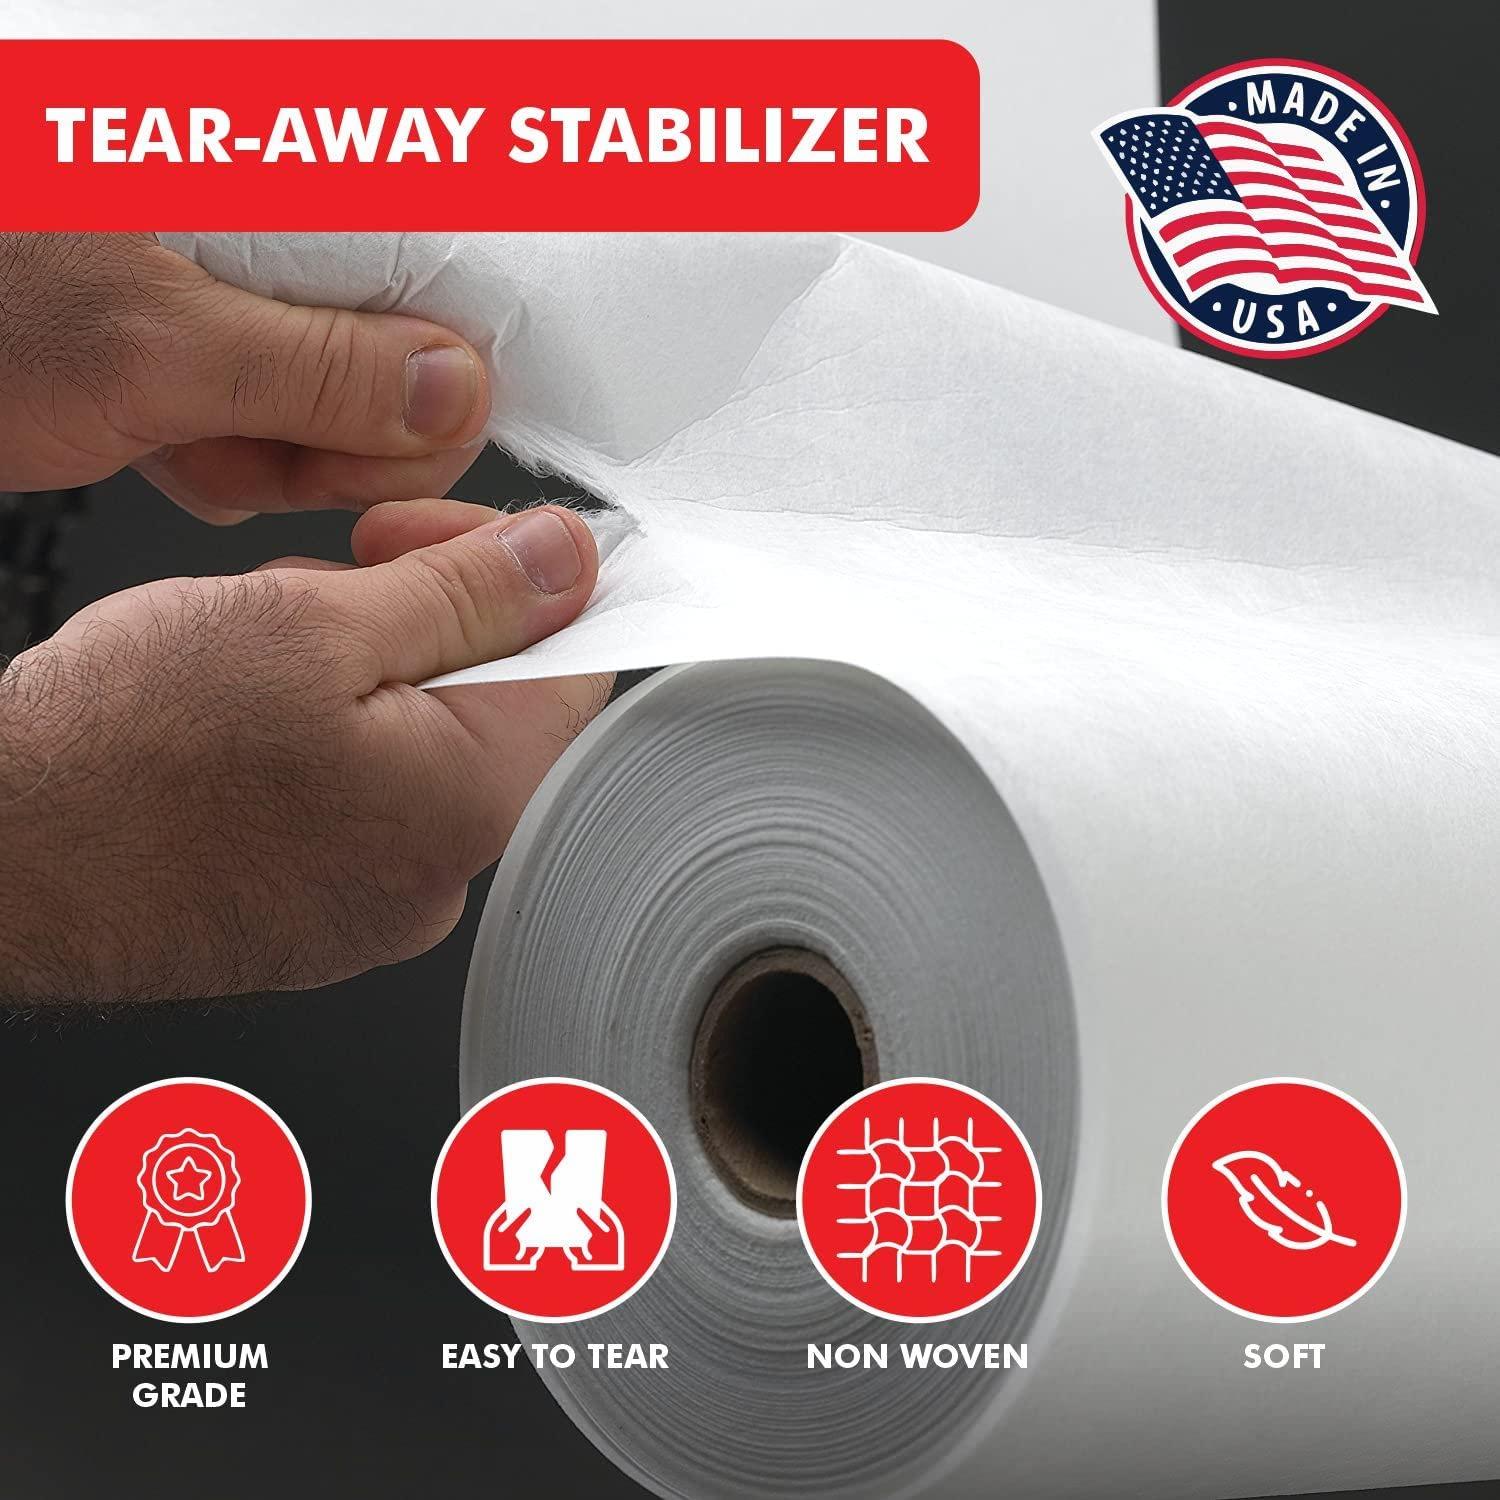 Superpunch Soft Tear Away Stabilizer, Medium Weight Tearaway Stabilizer for  Embroidery 12 inch x 10 Yard Roll, 1.8 oz Superstable Machine Stabilizers  Backing for Hand Sewing, Made in USA (White) 12 x